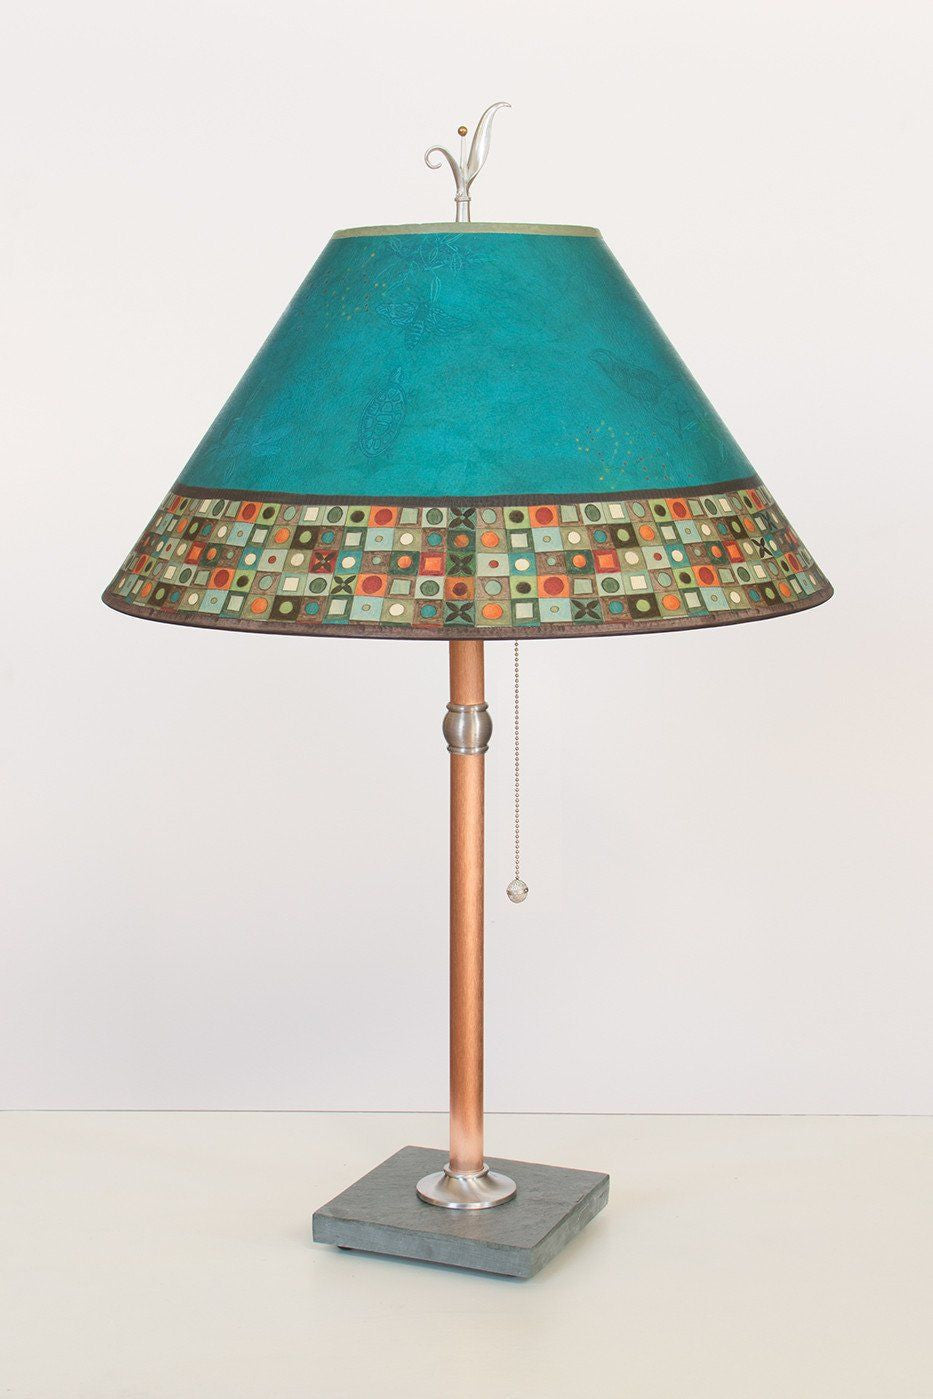 Janna Ugone &amp; Co Table Lamps Copper Table Lamp with Large Conical Shade in Jade Mosaic